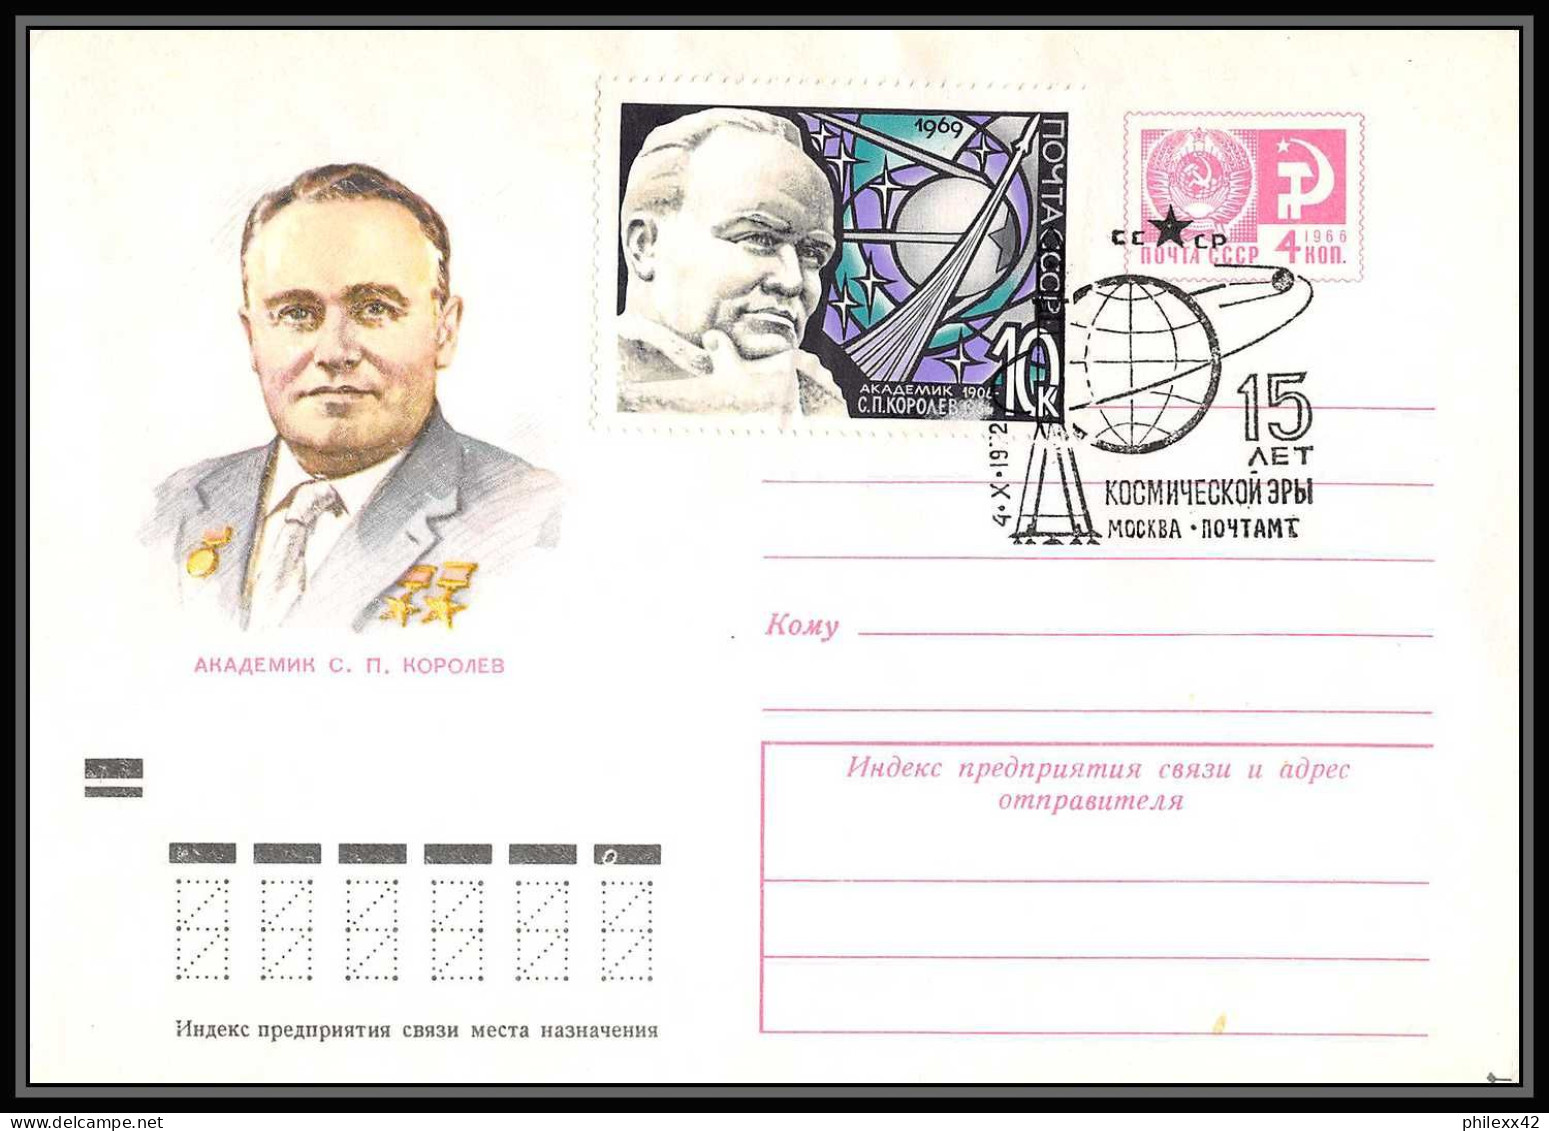 0999 Espace (space Raumfahrt) Entier postal (Stamped Stationery) Russie (Russia urss USSR) 4/10/1972 8 lettres rares